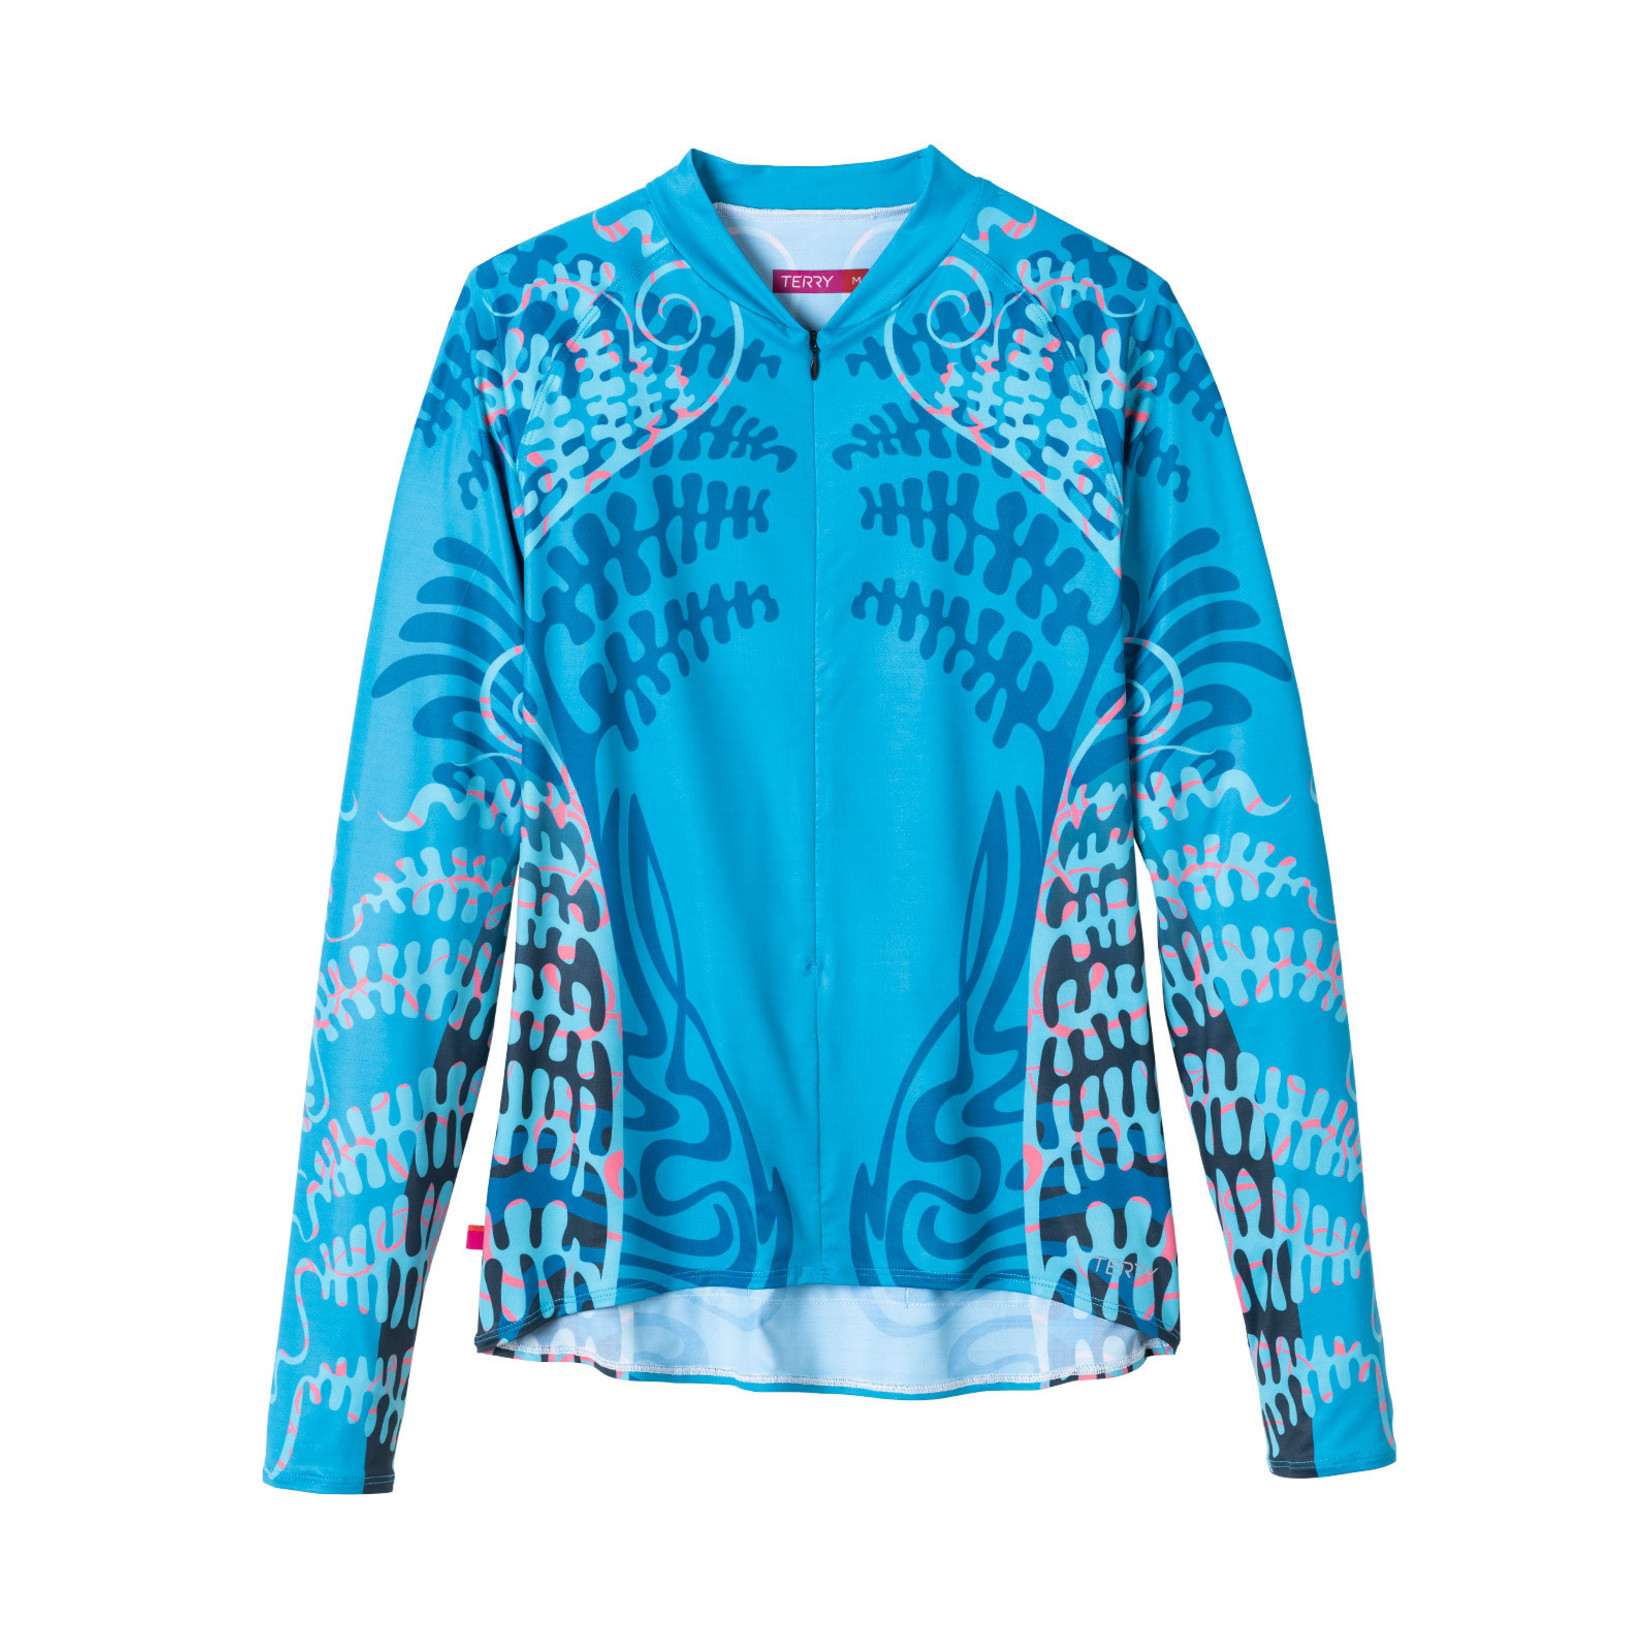 Terry Terry Soleil Long Sleeve Jersey